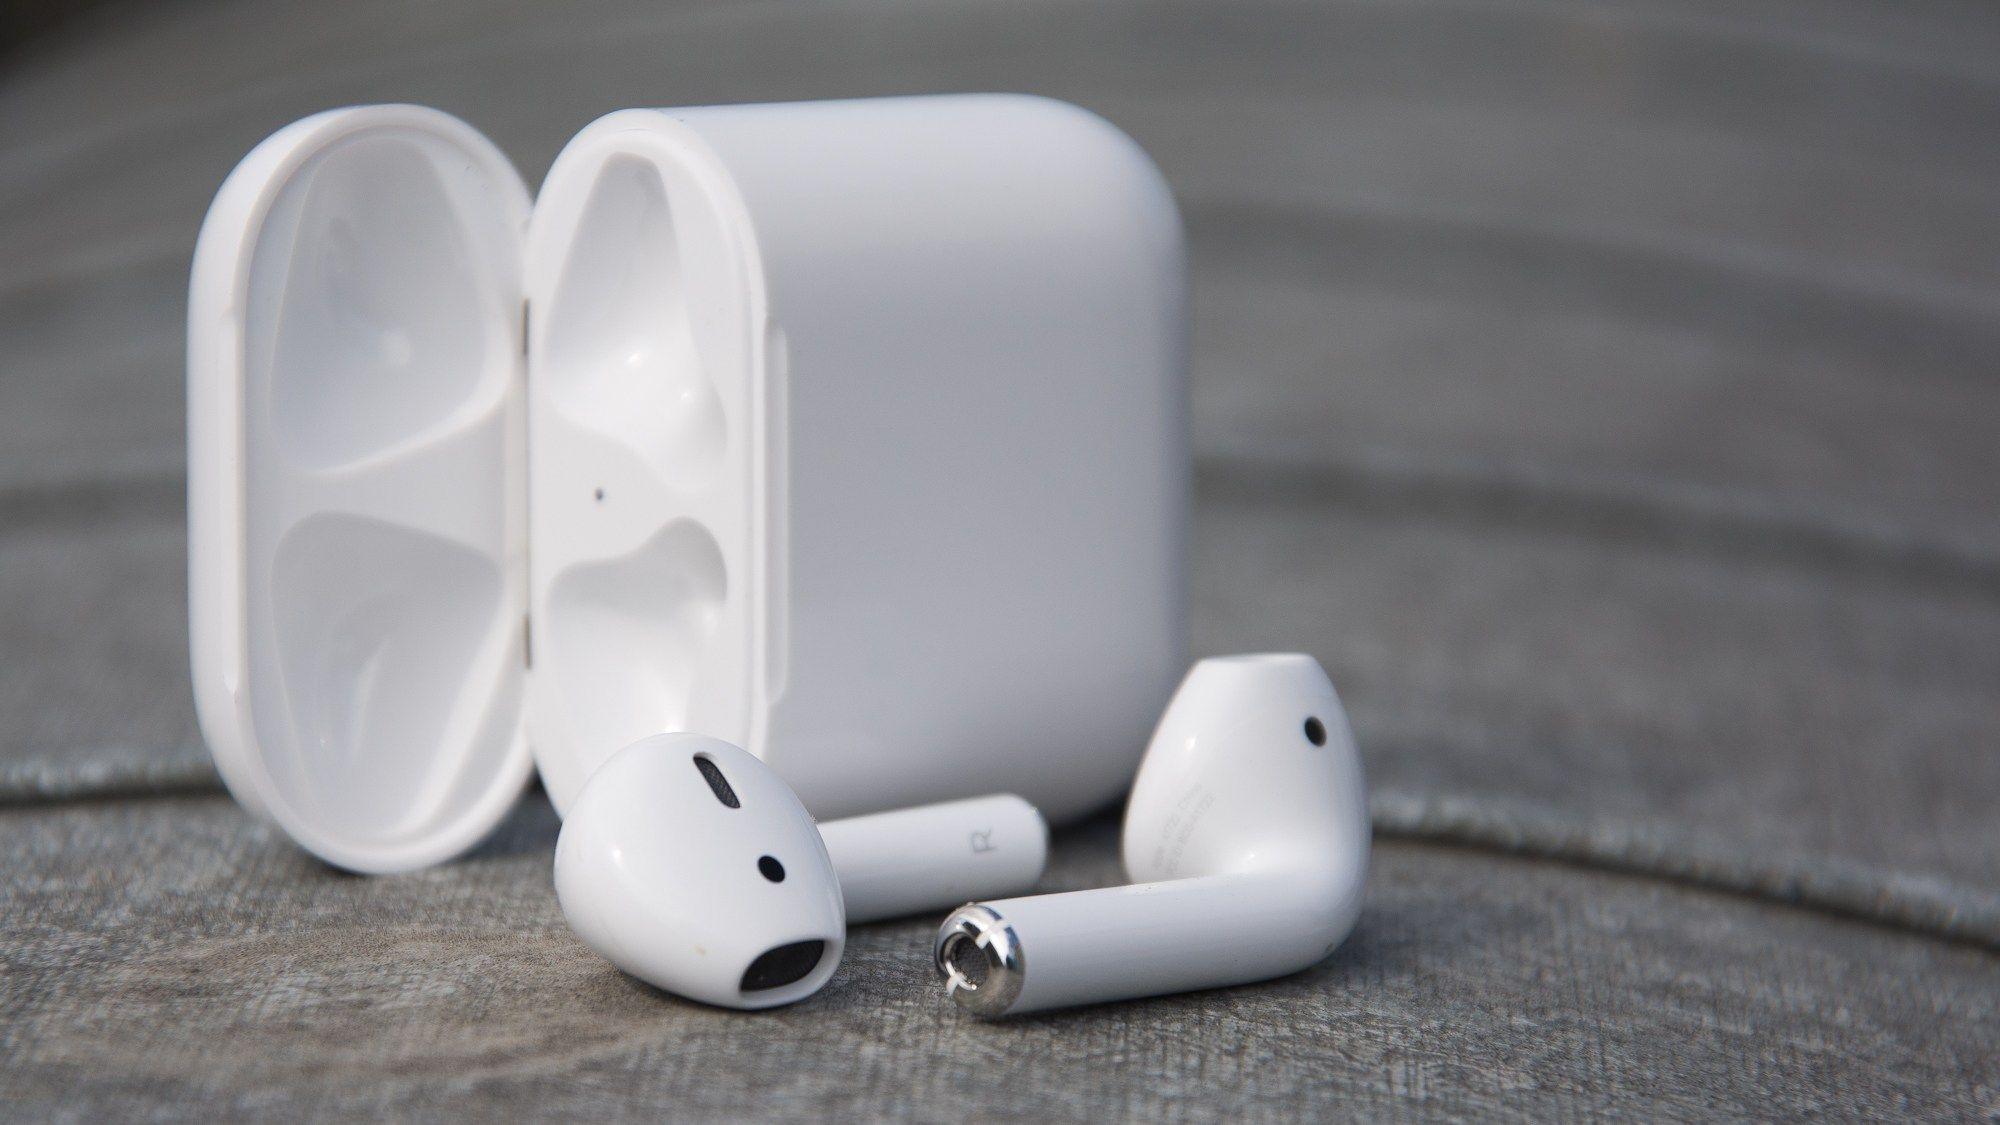 How to find lost AirPods with Find My iPhone (tutorial)